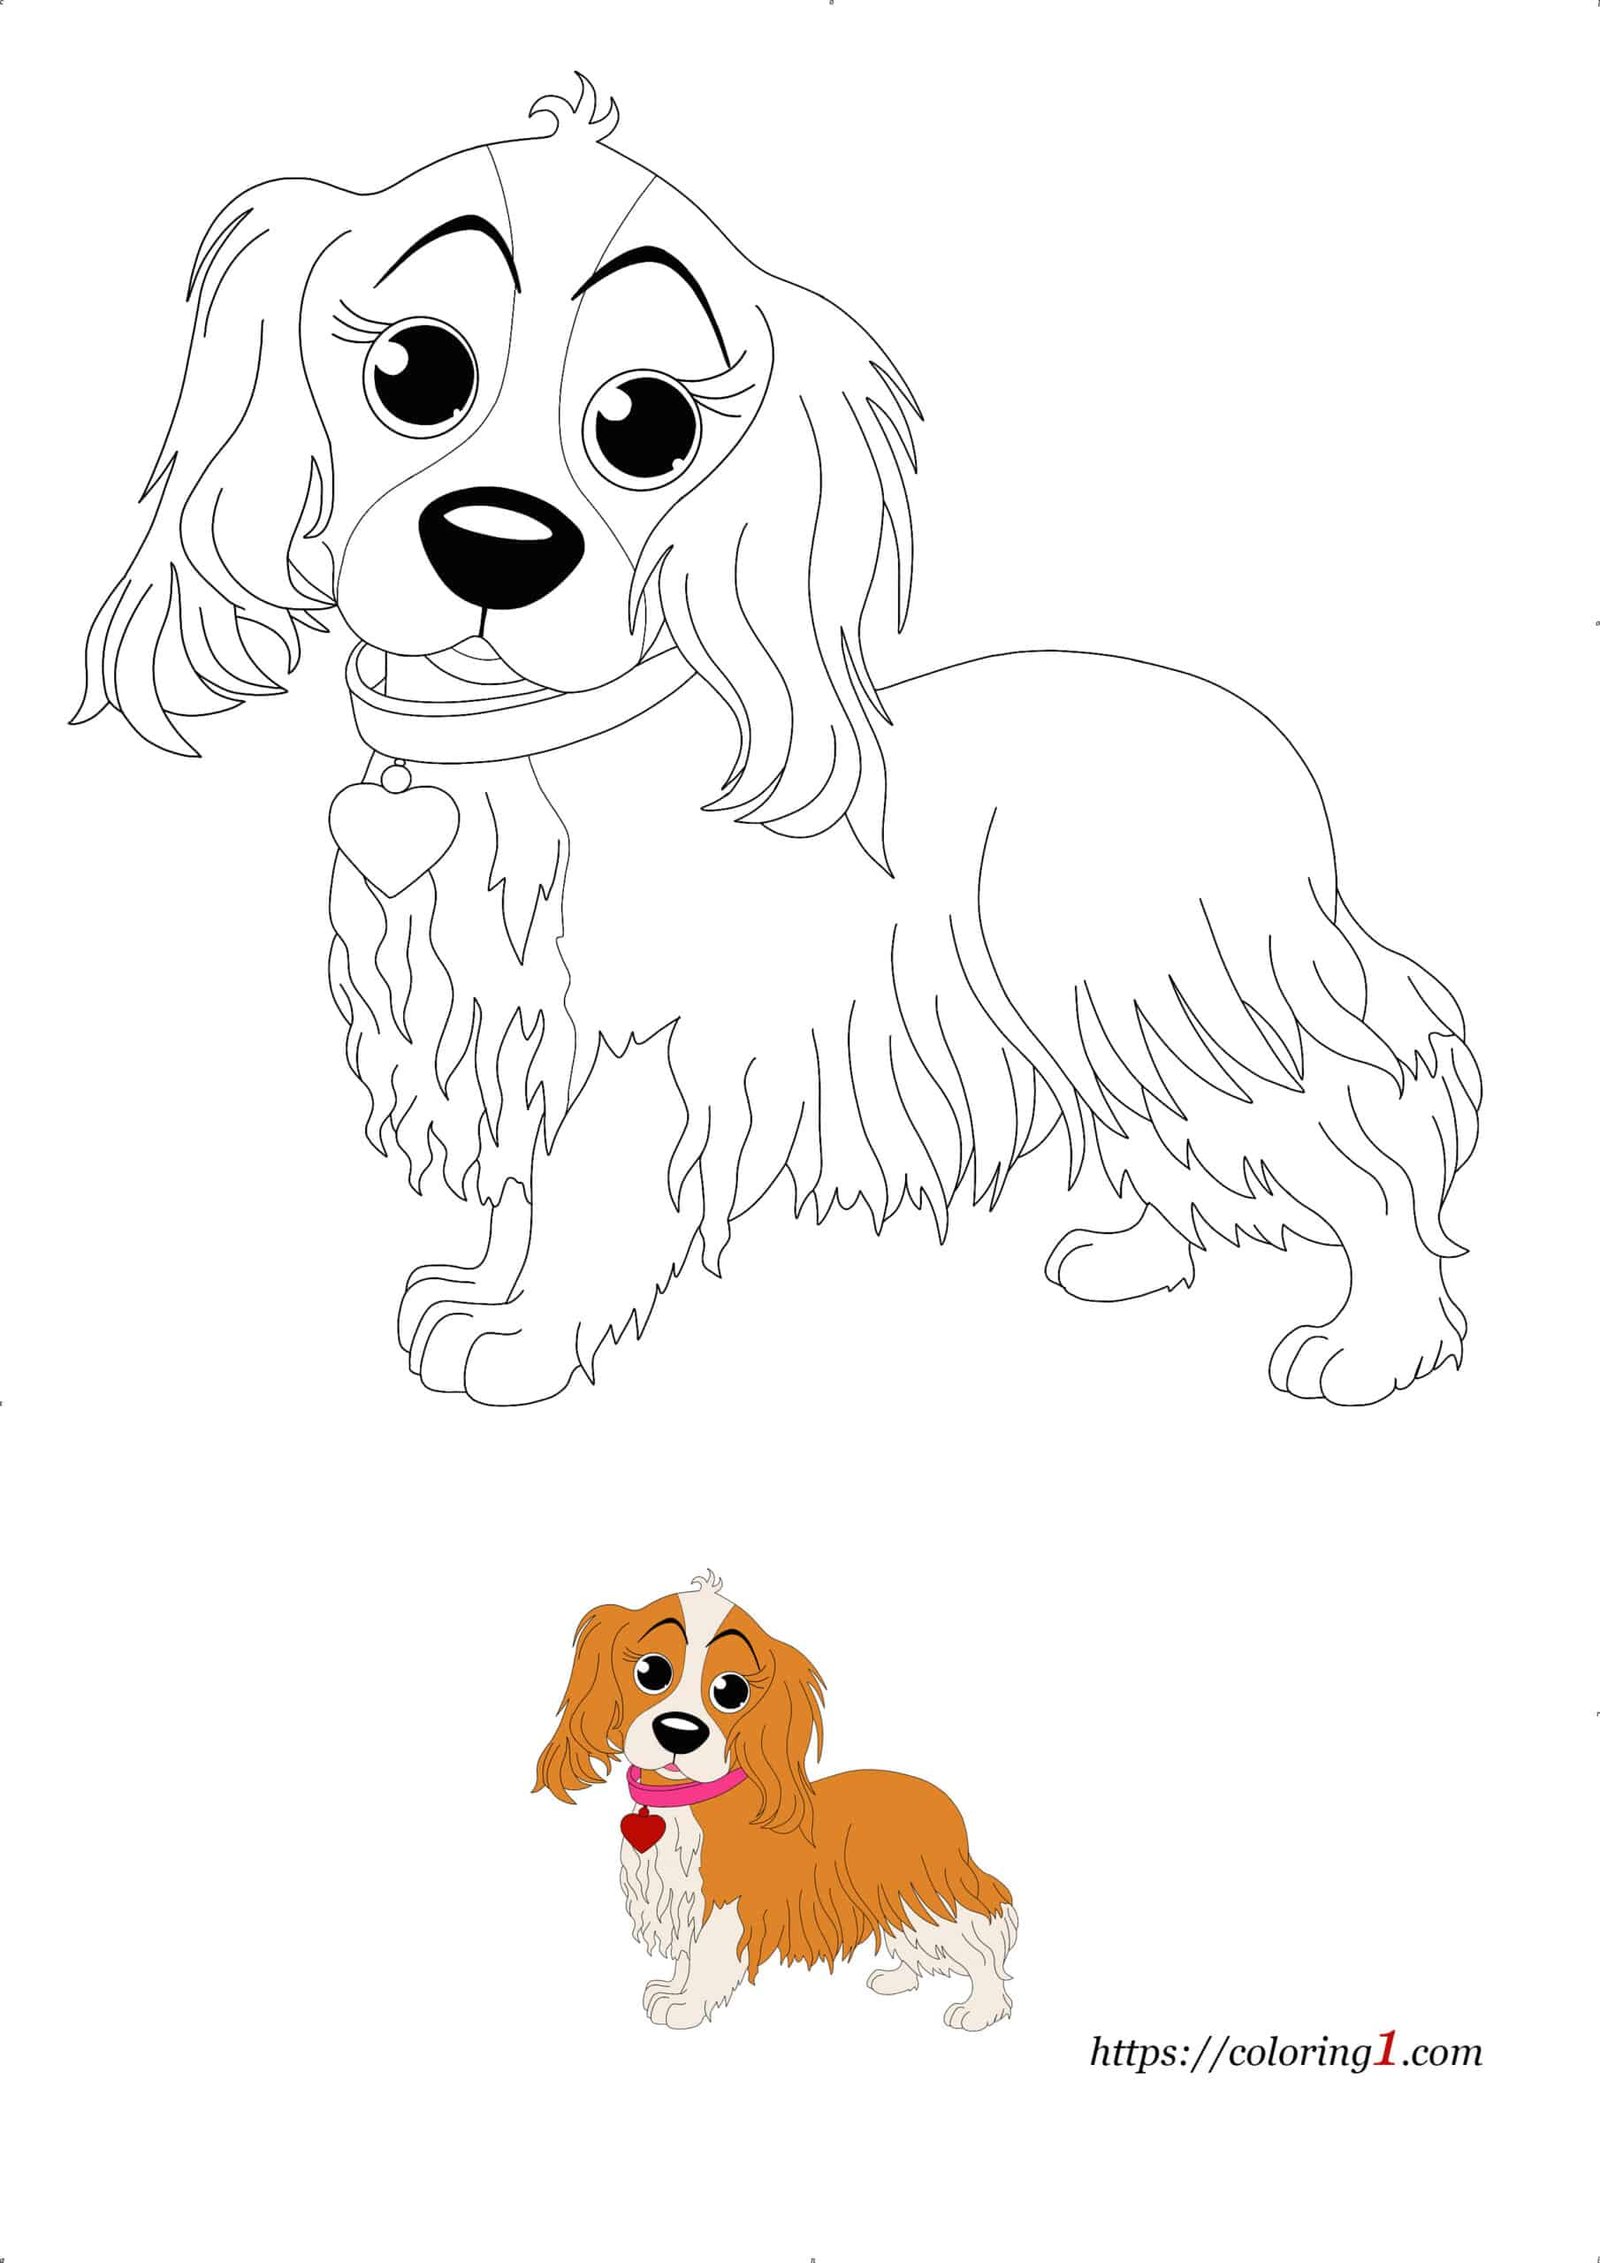 Cocker Spaniel Dog Breed coloring book page with sample